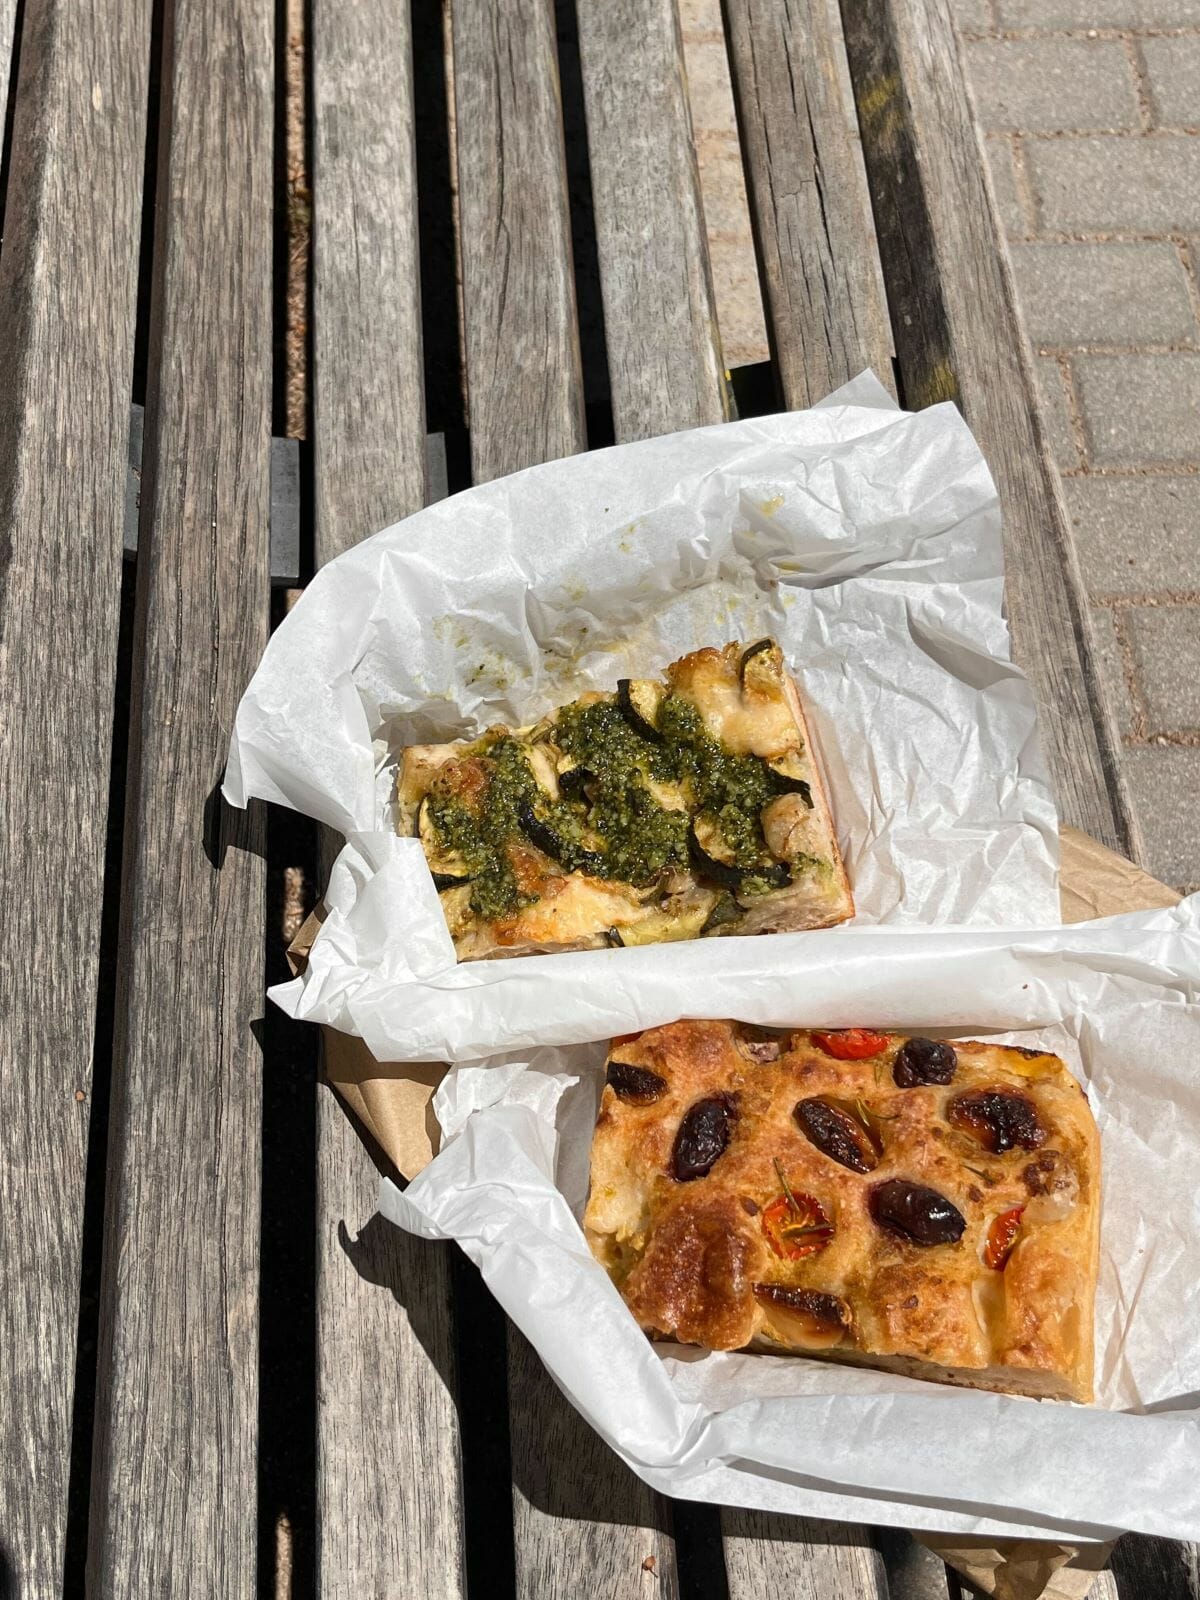 Two pieces of focaccia, one of the most iconic foods to try in Italy